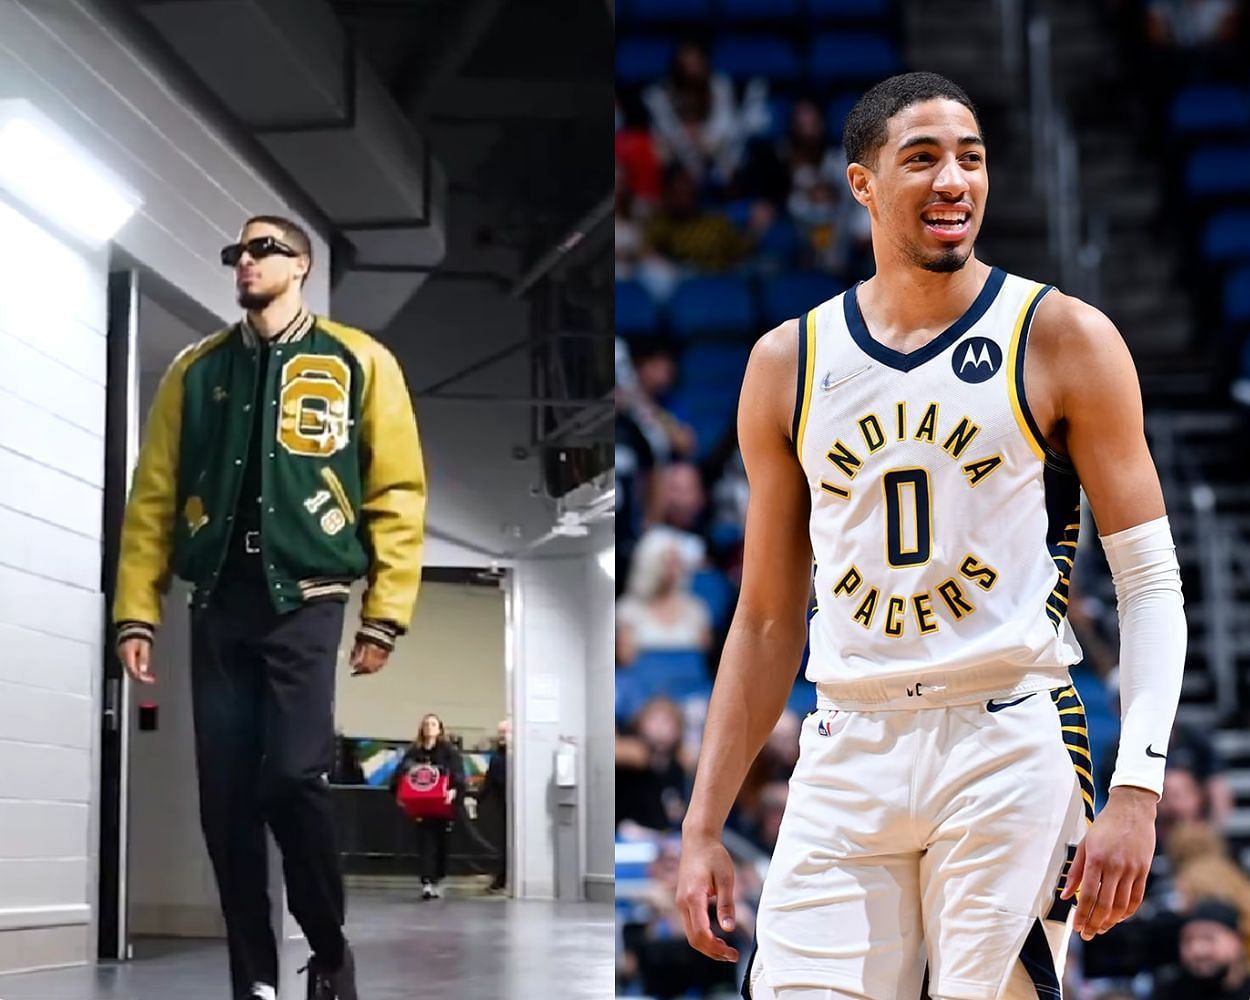 Before the Pacers vs Bucks game, Tyrese Haliburton proudly shows off his high school letterman jacket.